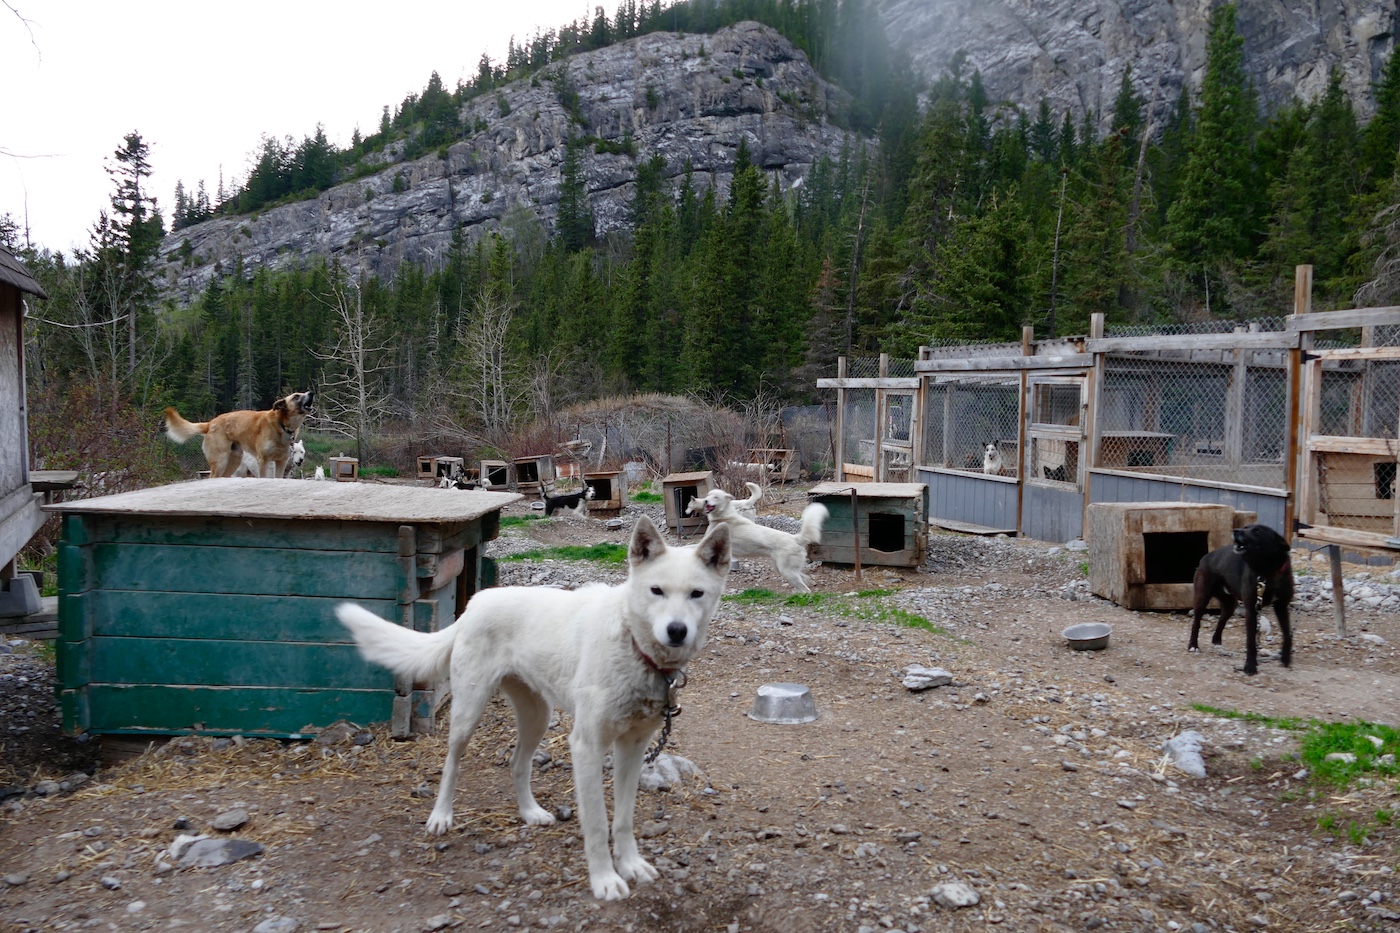 Sled dogs suffer in the summer